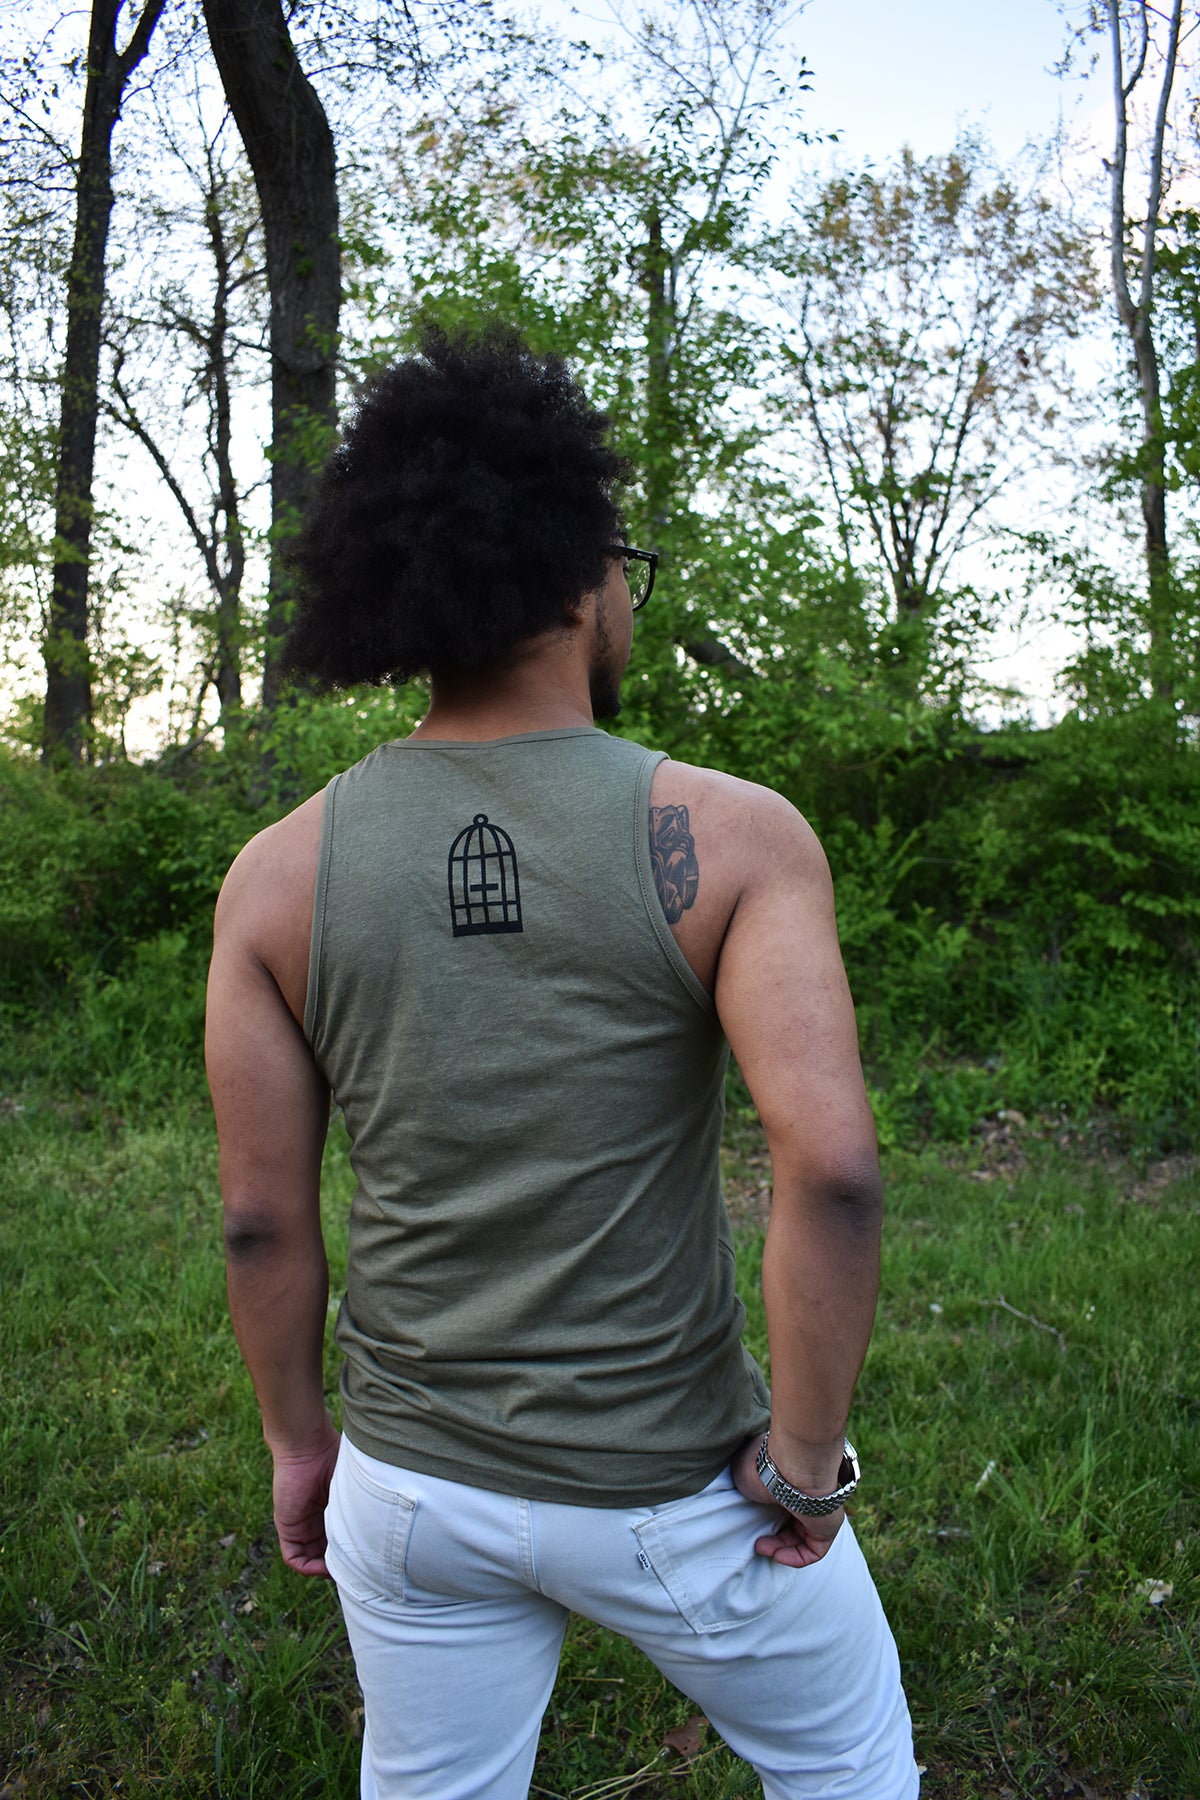 Male model wearing a green tank top a small No Egrets Birdcage logo in black on the back between the shoulders.